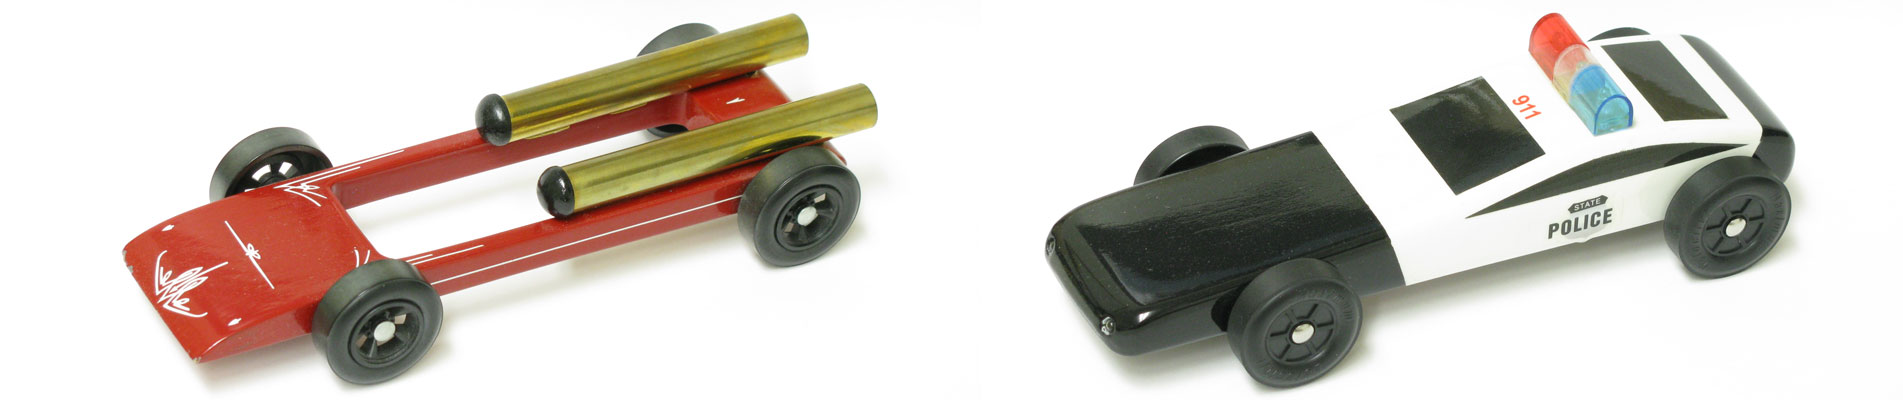 Pinewood Derby Speeder and Police Car Kits